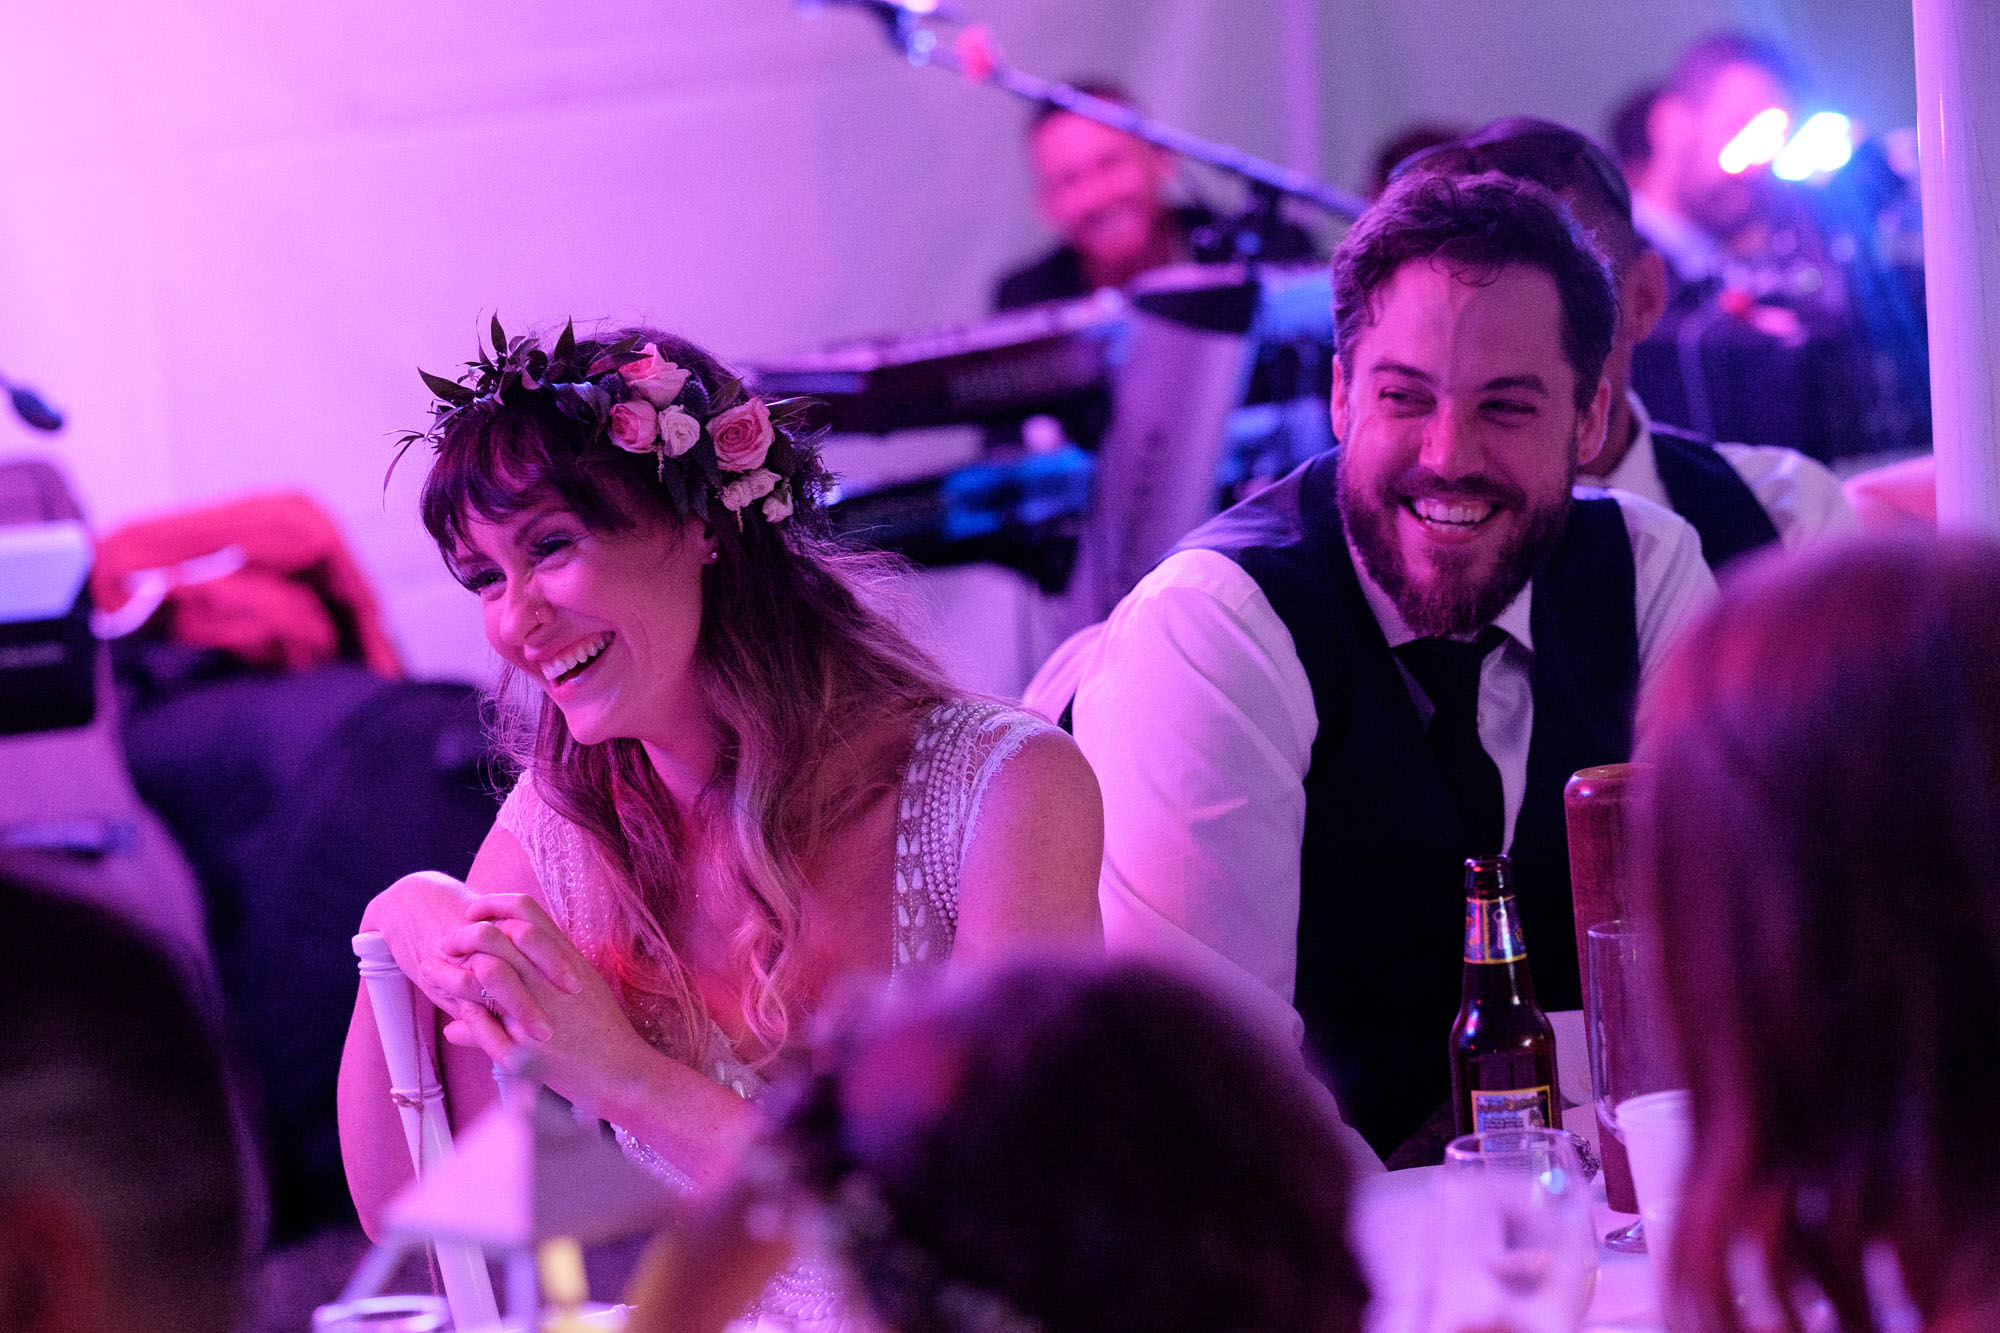  Kristin and Adam laugh during a toast at their backyard wedding reception in Barrie, Ontario. &nbsp;Photograph by Scott Williams. 